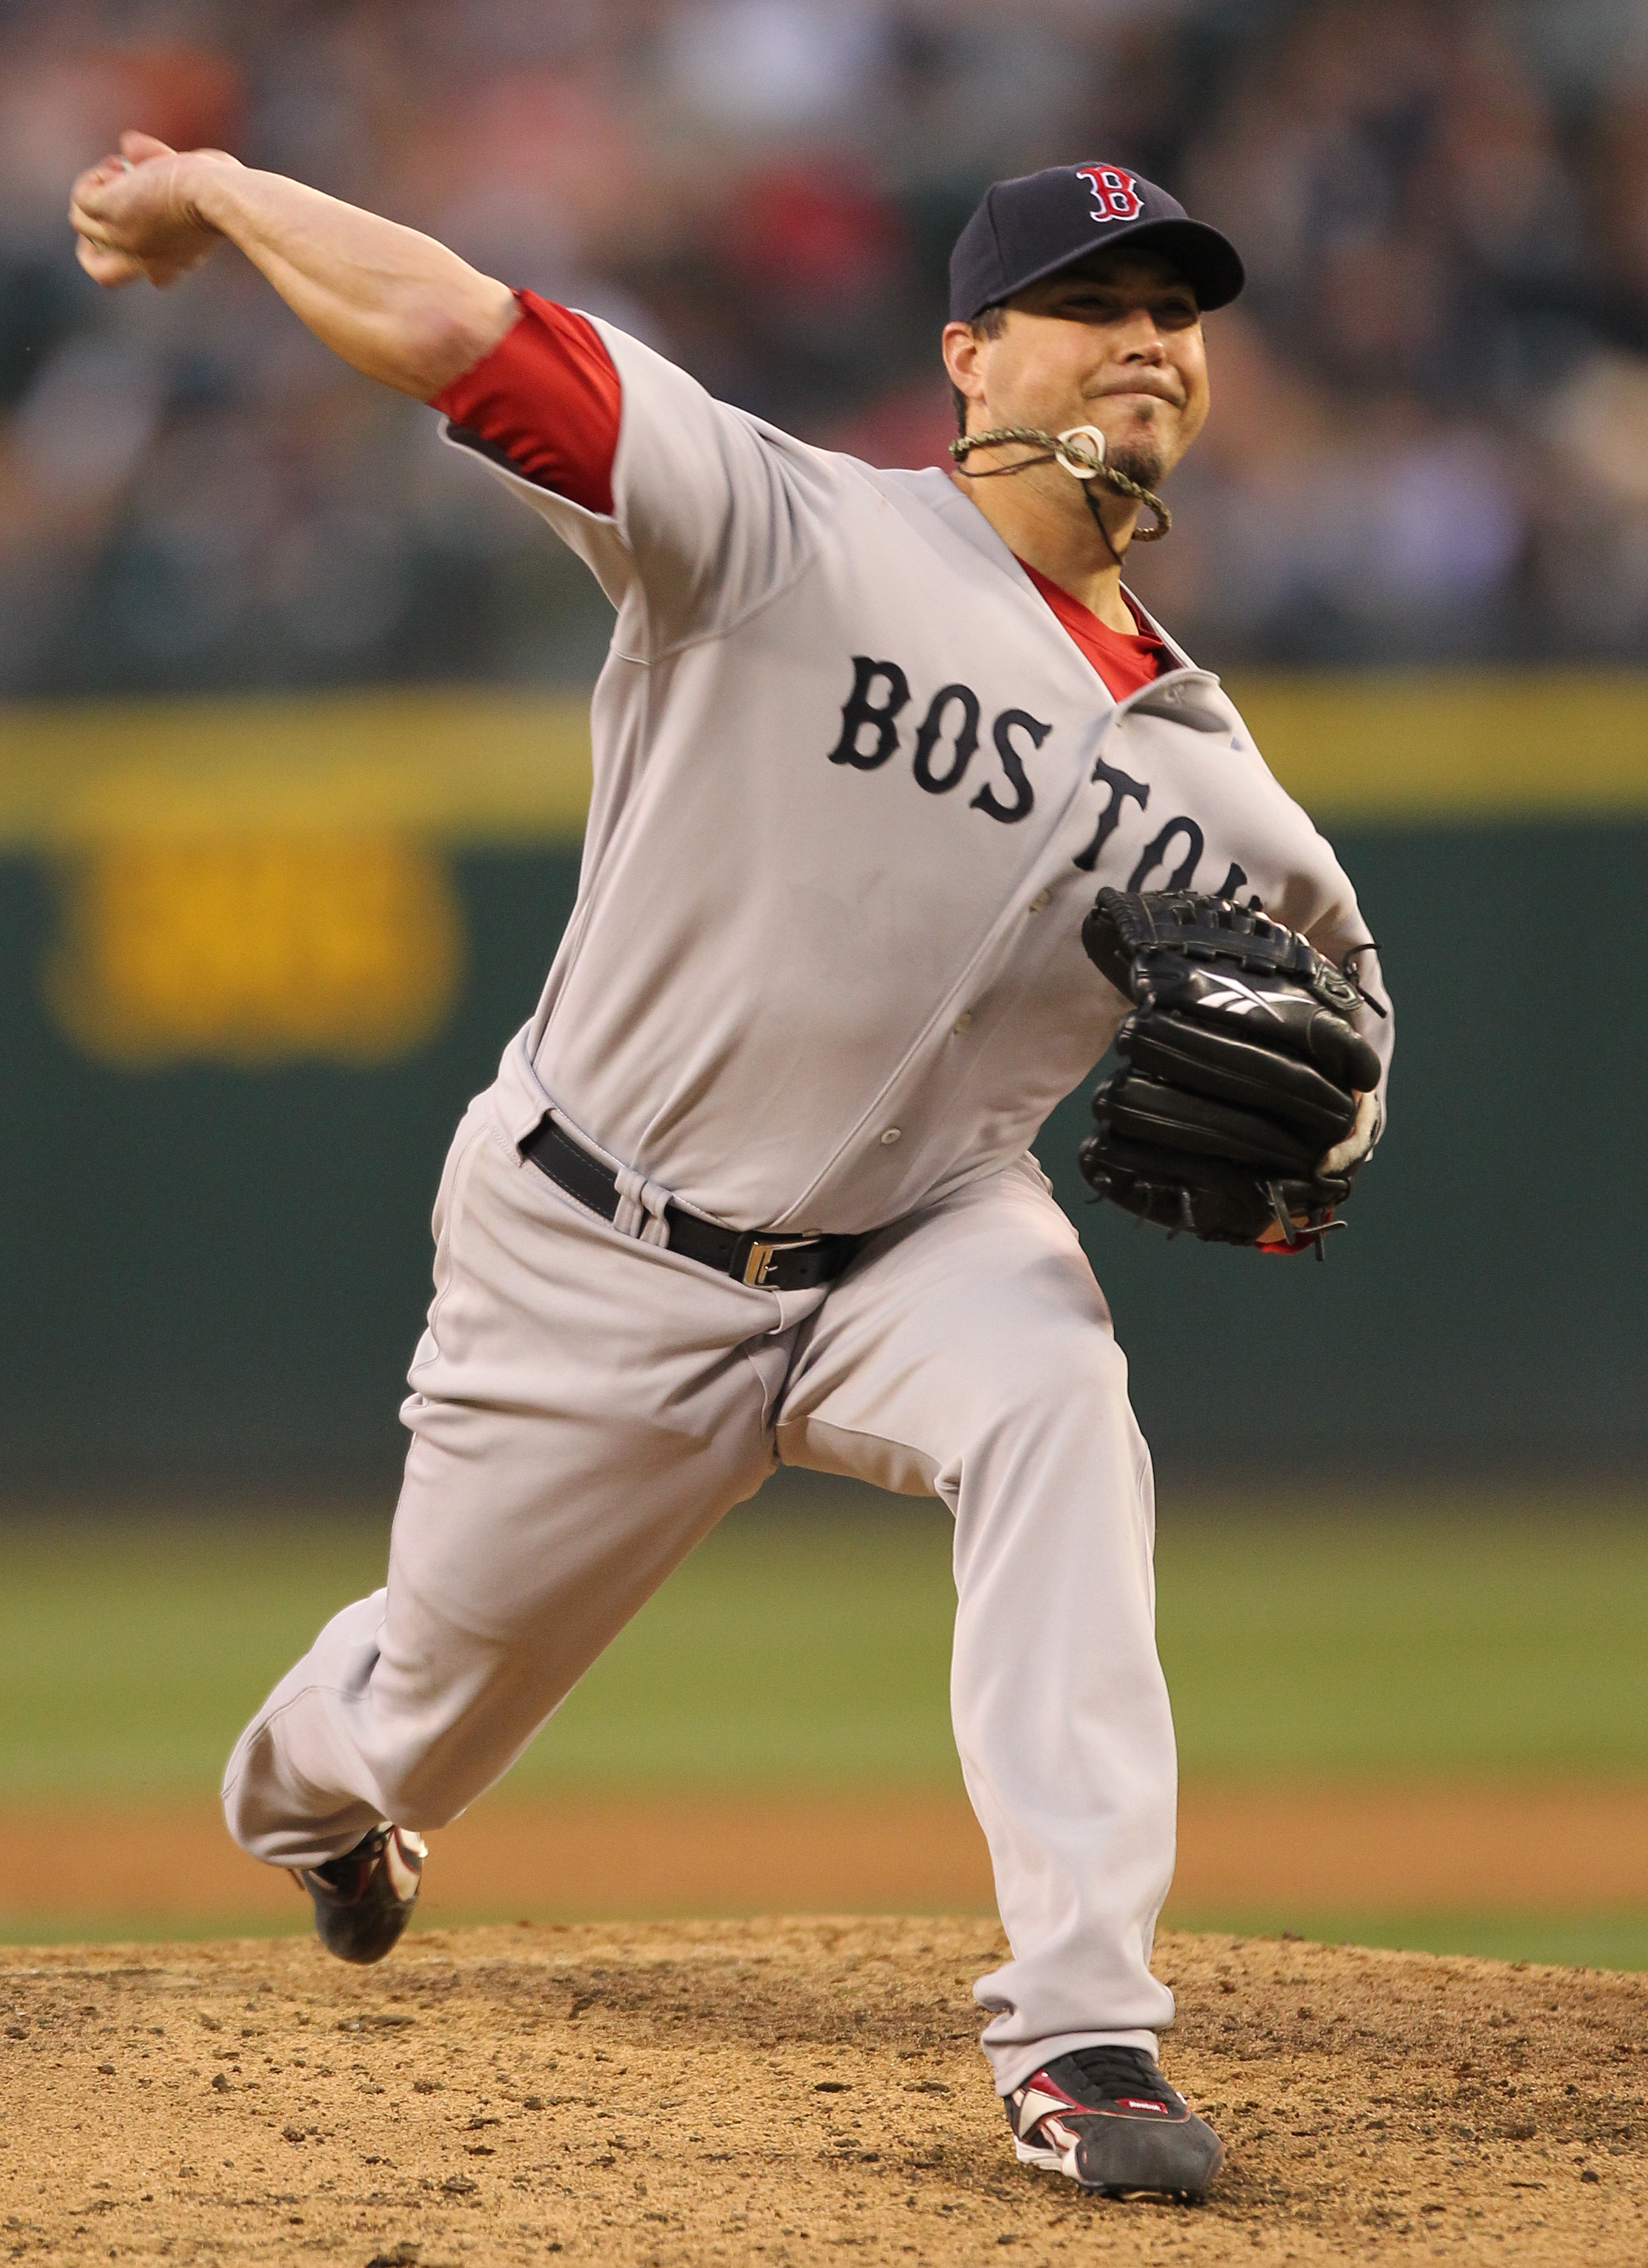 SEATTLE - JULY 23: Starting pitcher Josh Beckett #19 of the Boston Red Sox pitches against the Seattle Mariners at Safeco Field on July 23, 2010 in Seattle, Washington. (Photo by Otto Greule Jr/Getty Images)